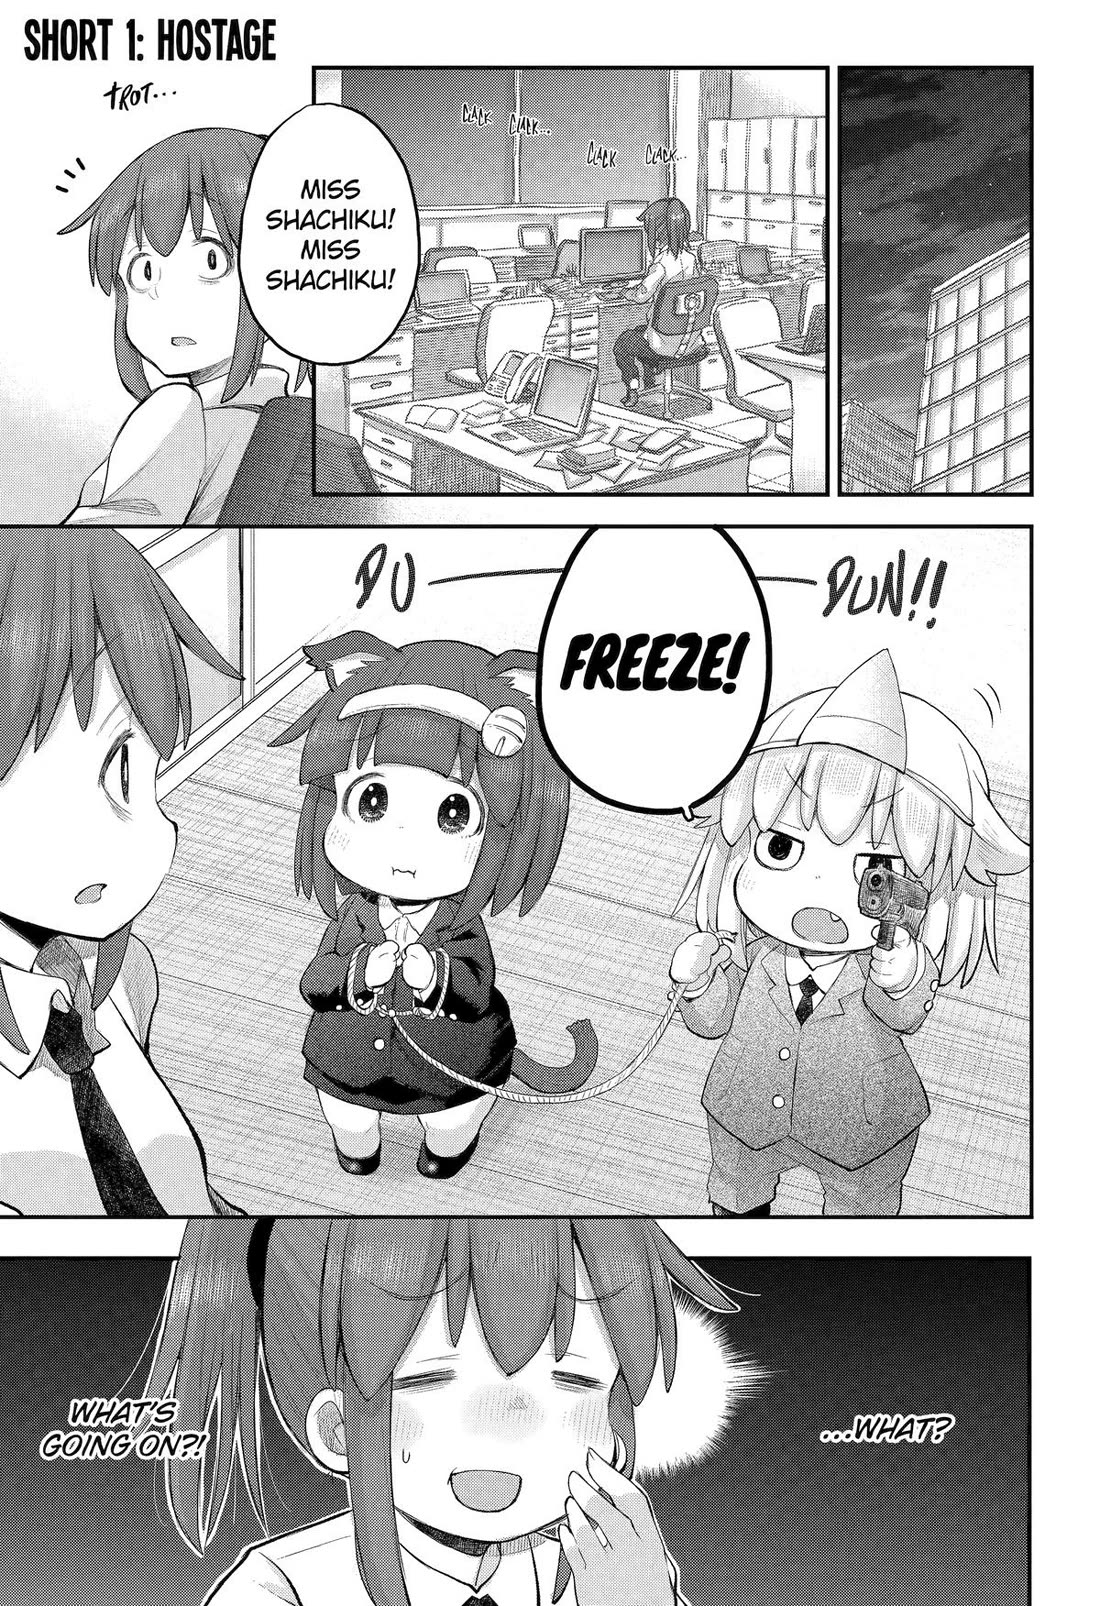 Ms. Corporate Slave Wants to be Healed by a Loli Spirit - chapter 115 - #1